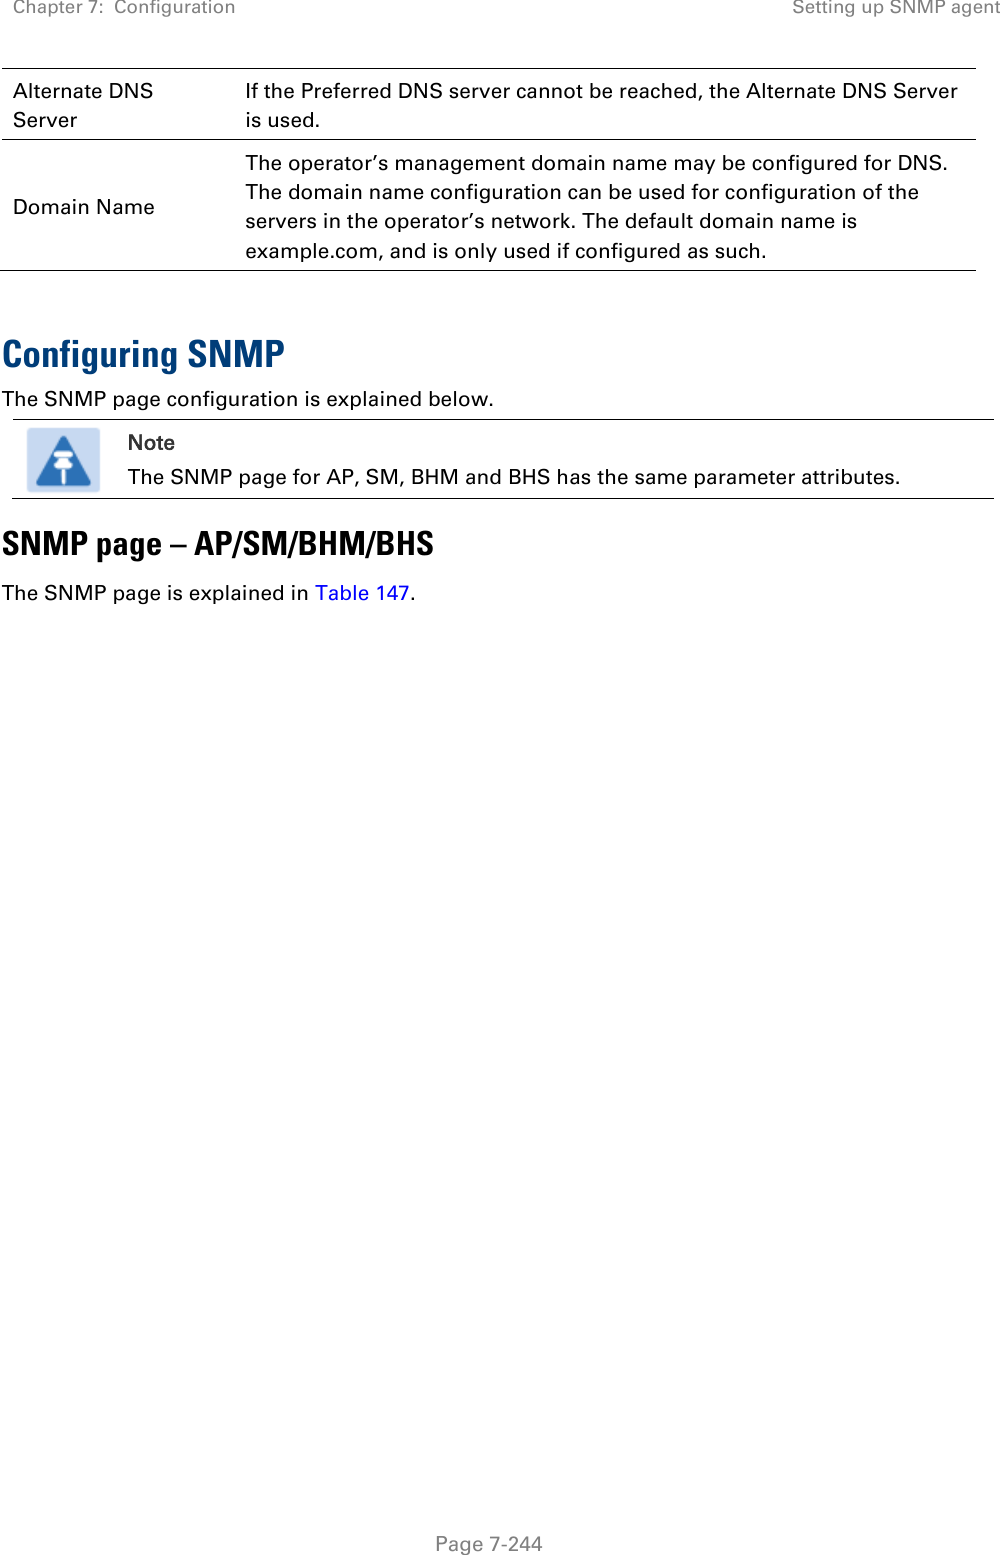 Chapter 7:  Configuration Setting up SNMP agent   Page 7-244 Alternate DNS Server If the Preferred DNS server cannot be reached, the Alternate DNS Server is used. Domain Name The operator’s management domain name may be configured for DNS. The domain name configuration can be used for configuration of the servers in the operator’s network. The default domain name is example.com, and is only used if configured as such.  Configuring SNMP The SNMP page configuration is explained below.  Note The SNMP page for AP, SM, BHM and BHS has the same parameter attributes. SNMP page – AP/SM/BHM/BHS The SNMP page is explained in Table 147. 